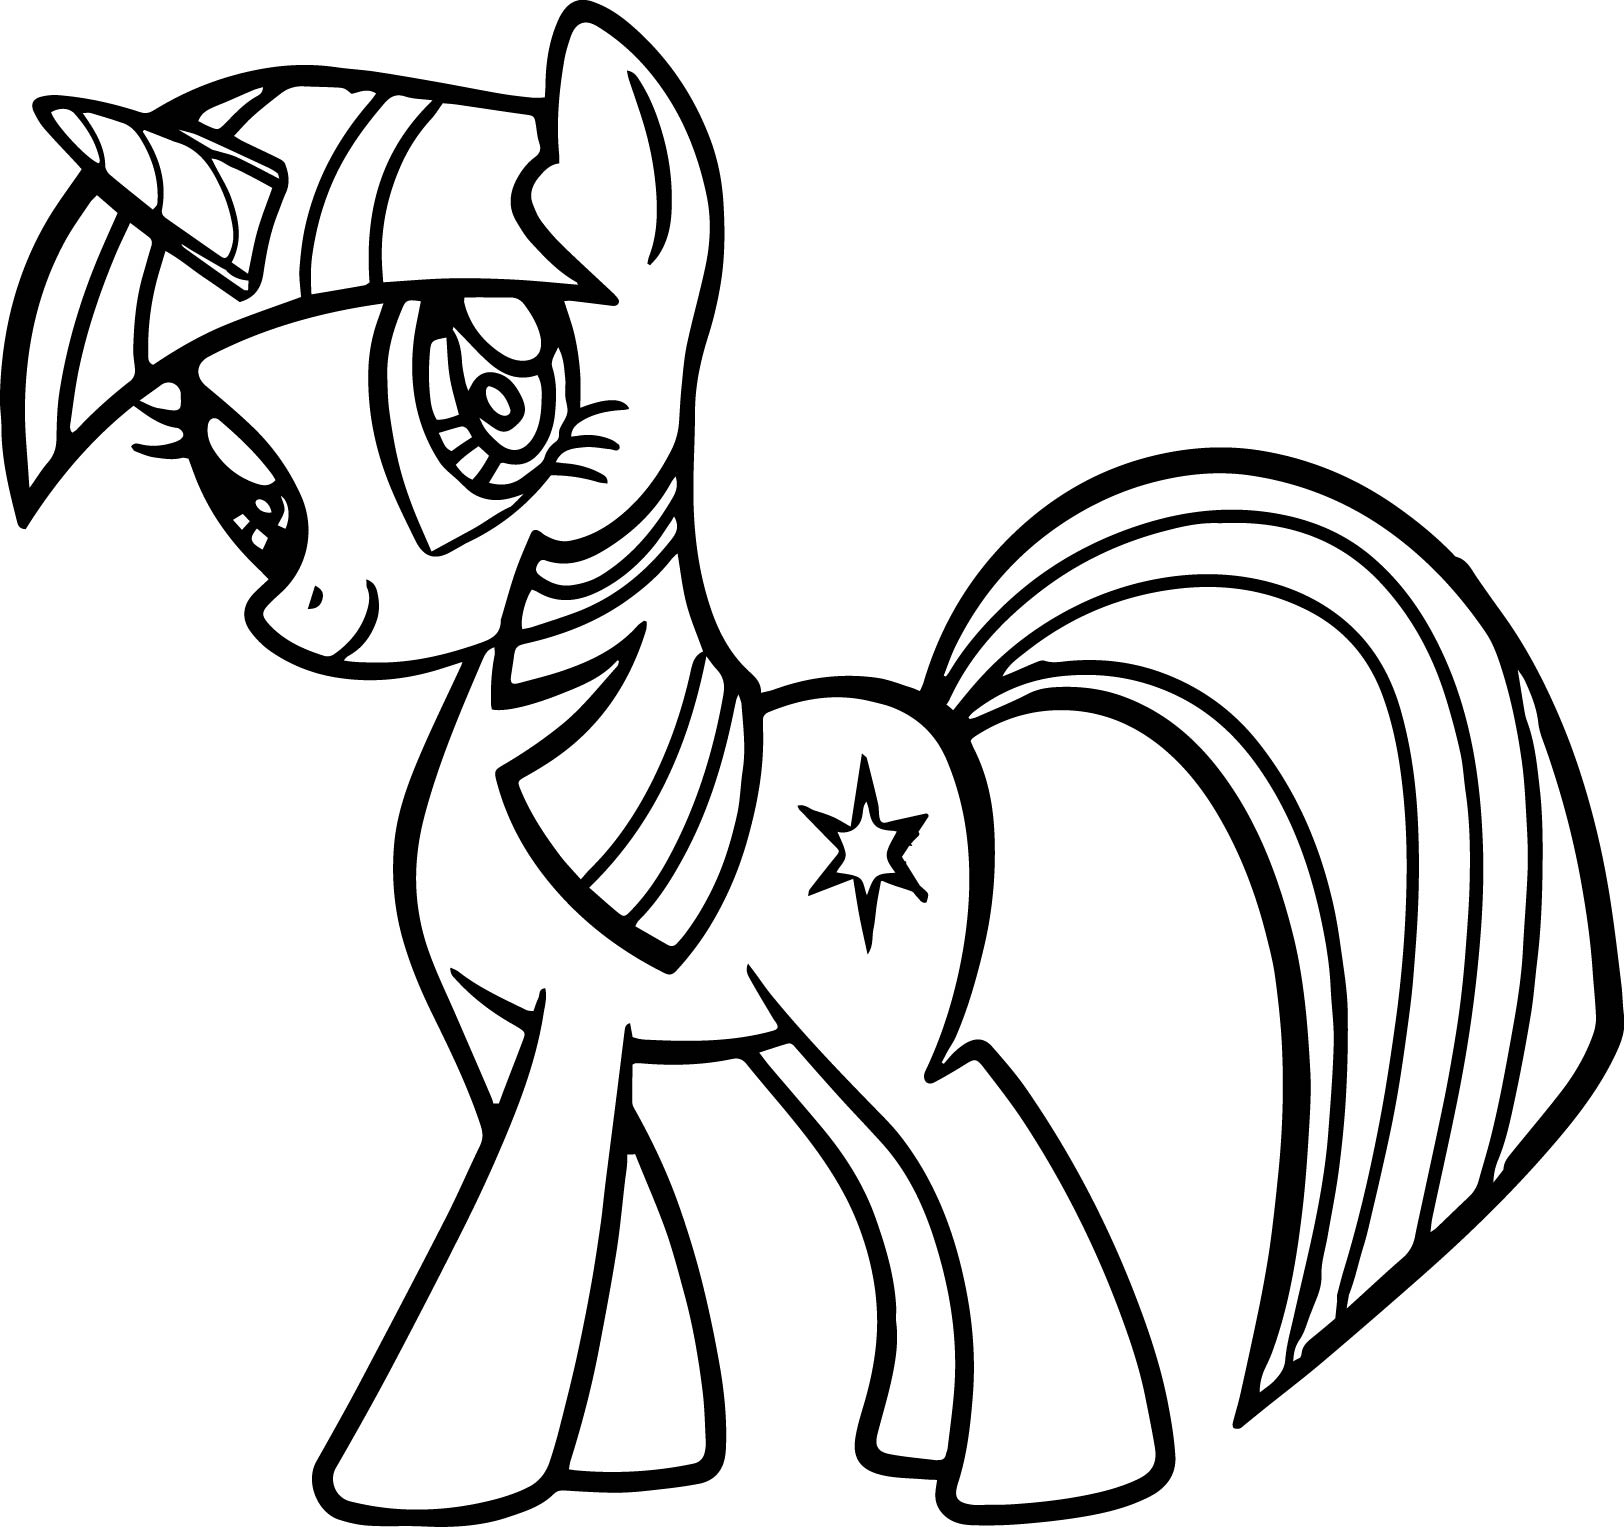 My Little Pony Coloring Pages Twilight Sparkle at ...